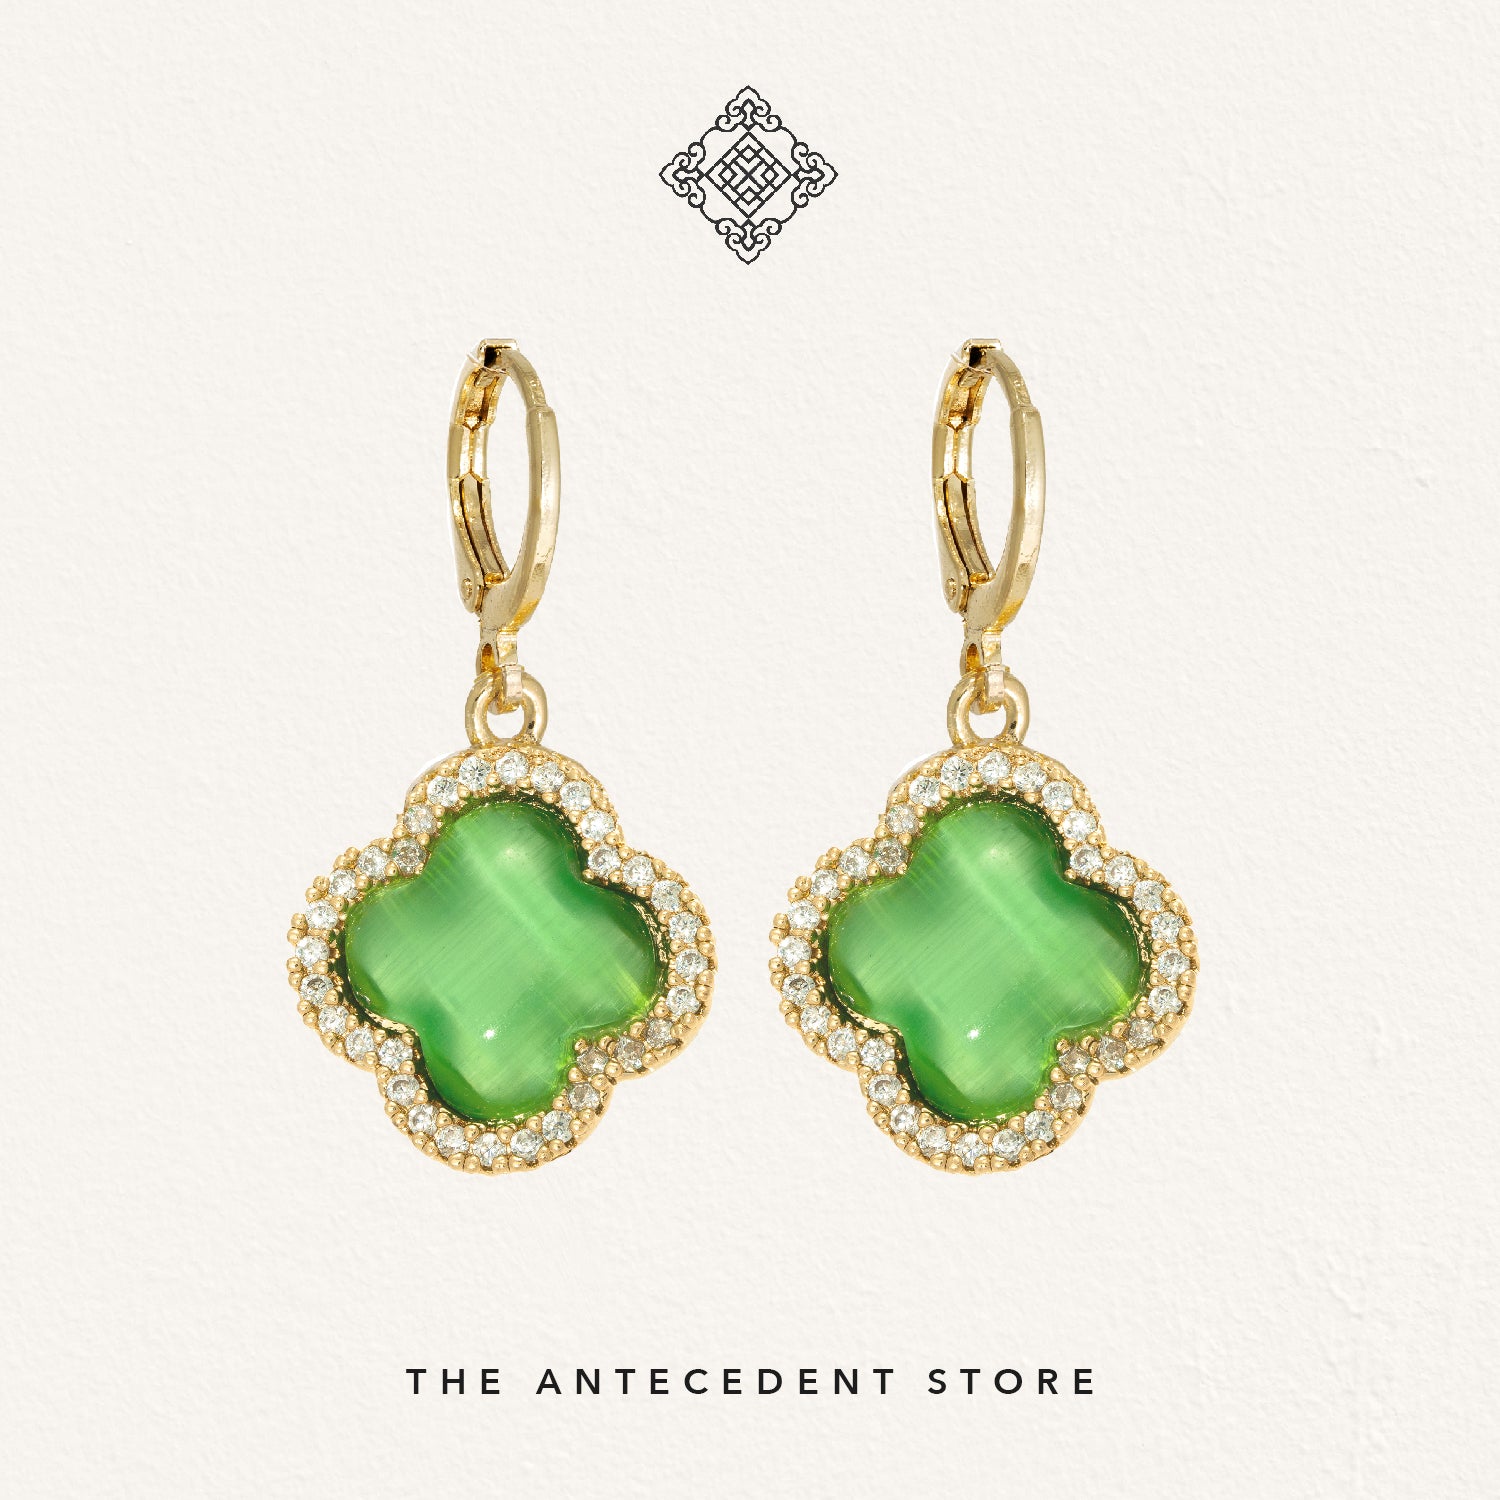 Green Cat Eye Stone With Cubic Zirconia Crystals Earrings - 14K Real Gold Plated Jewellery